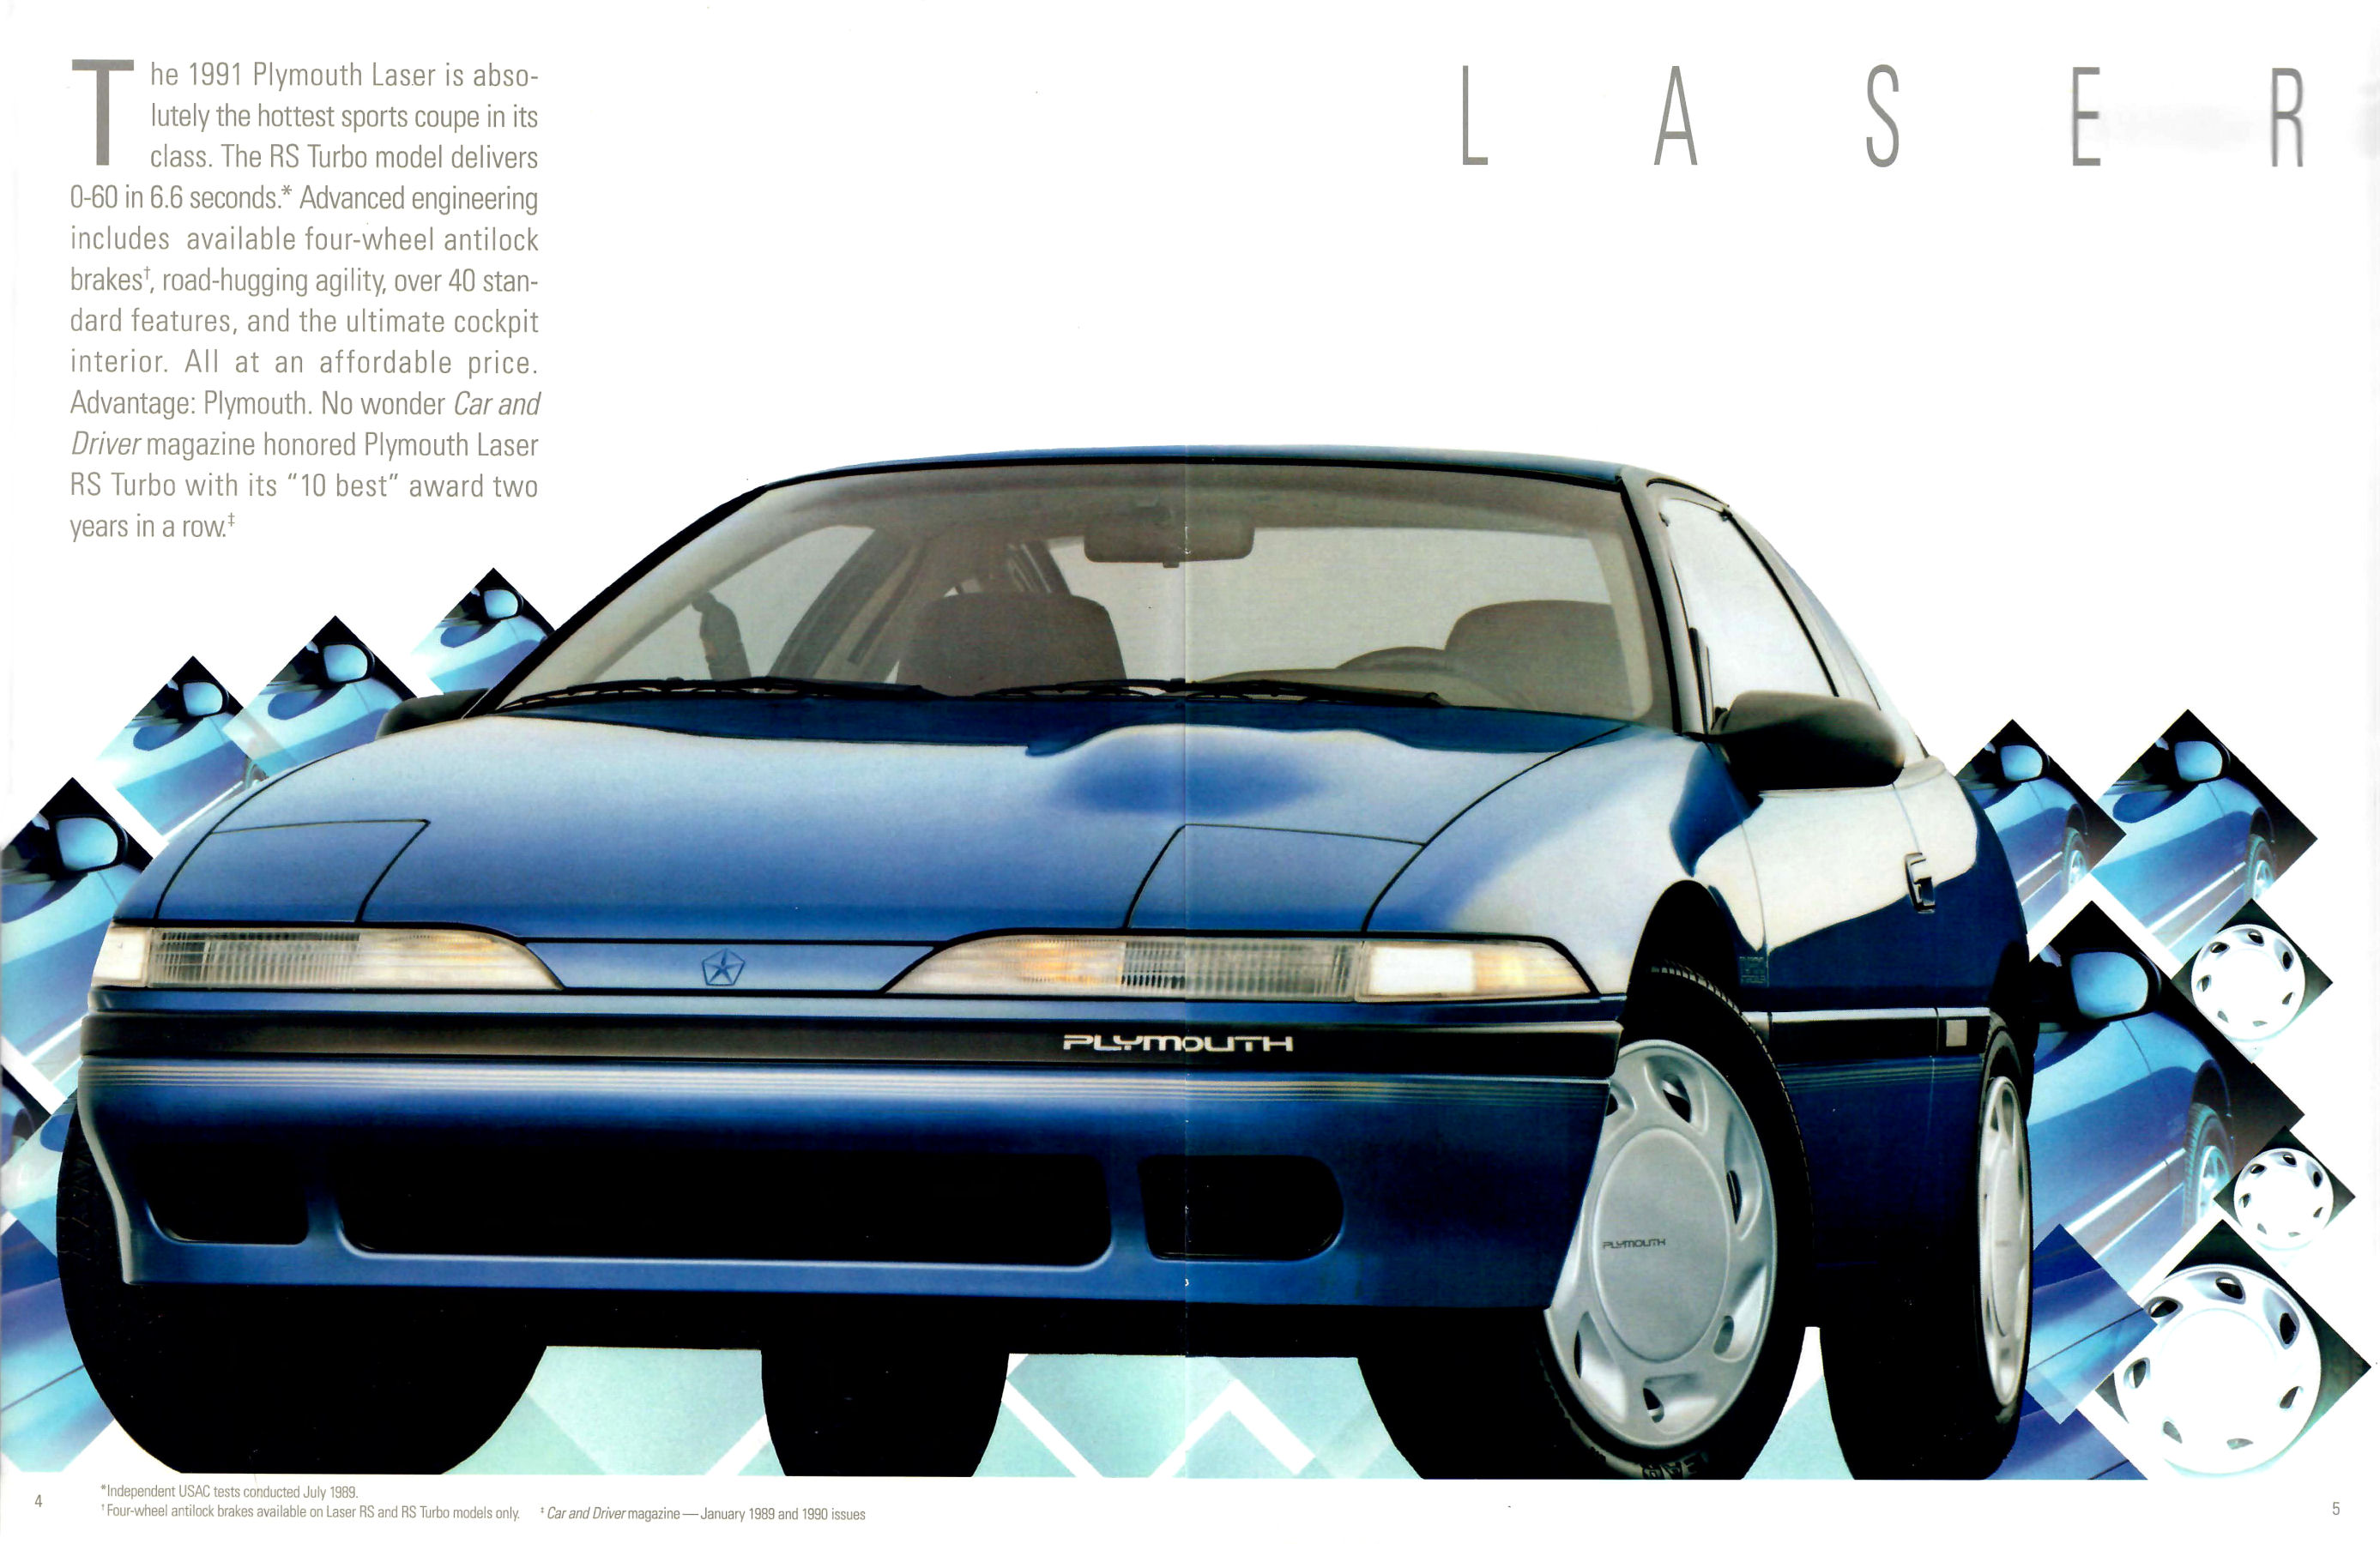 1991 Plymouth Laser-04-05